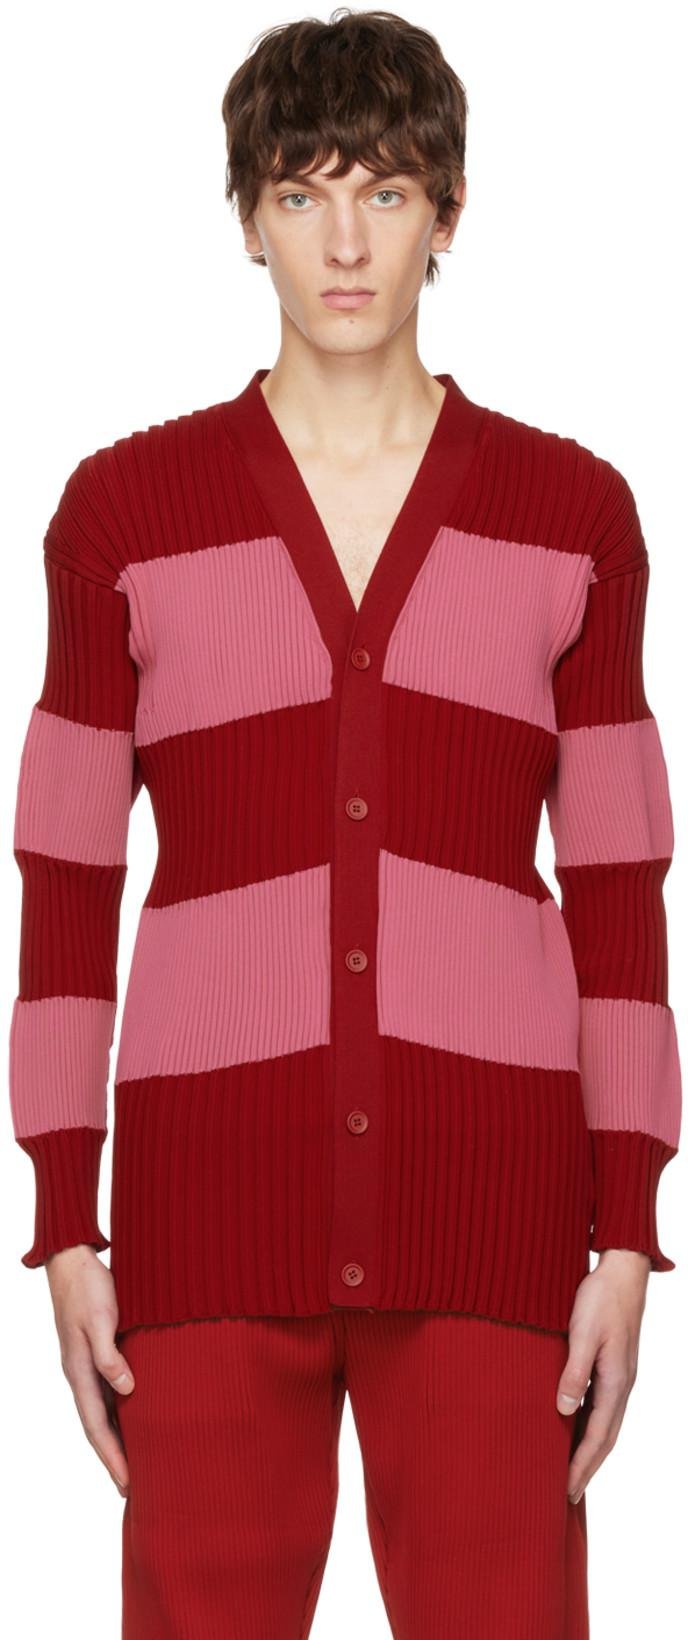 SSENSE Exclusive Red & Pink Fluted Cardigan by CFCL